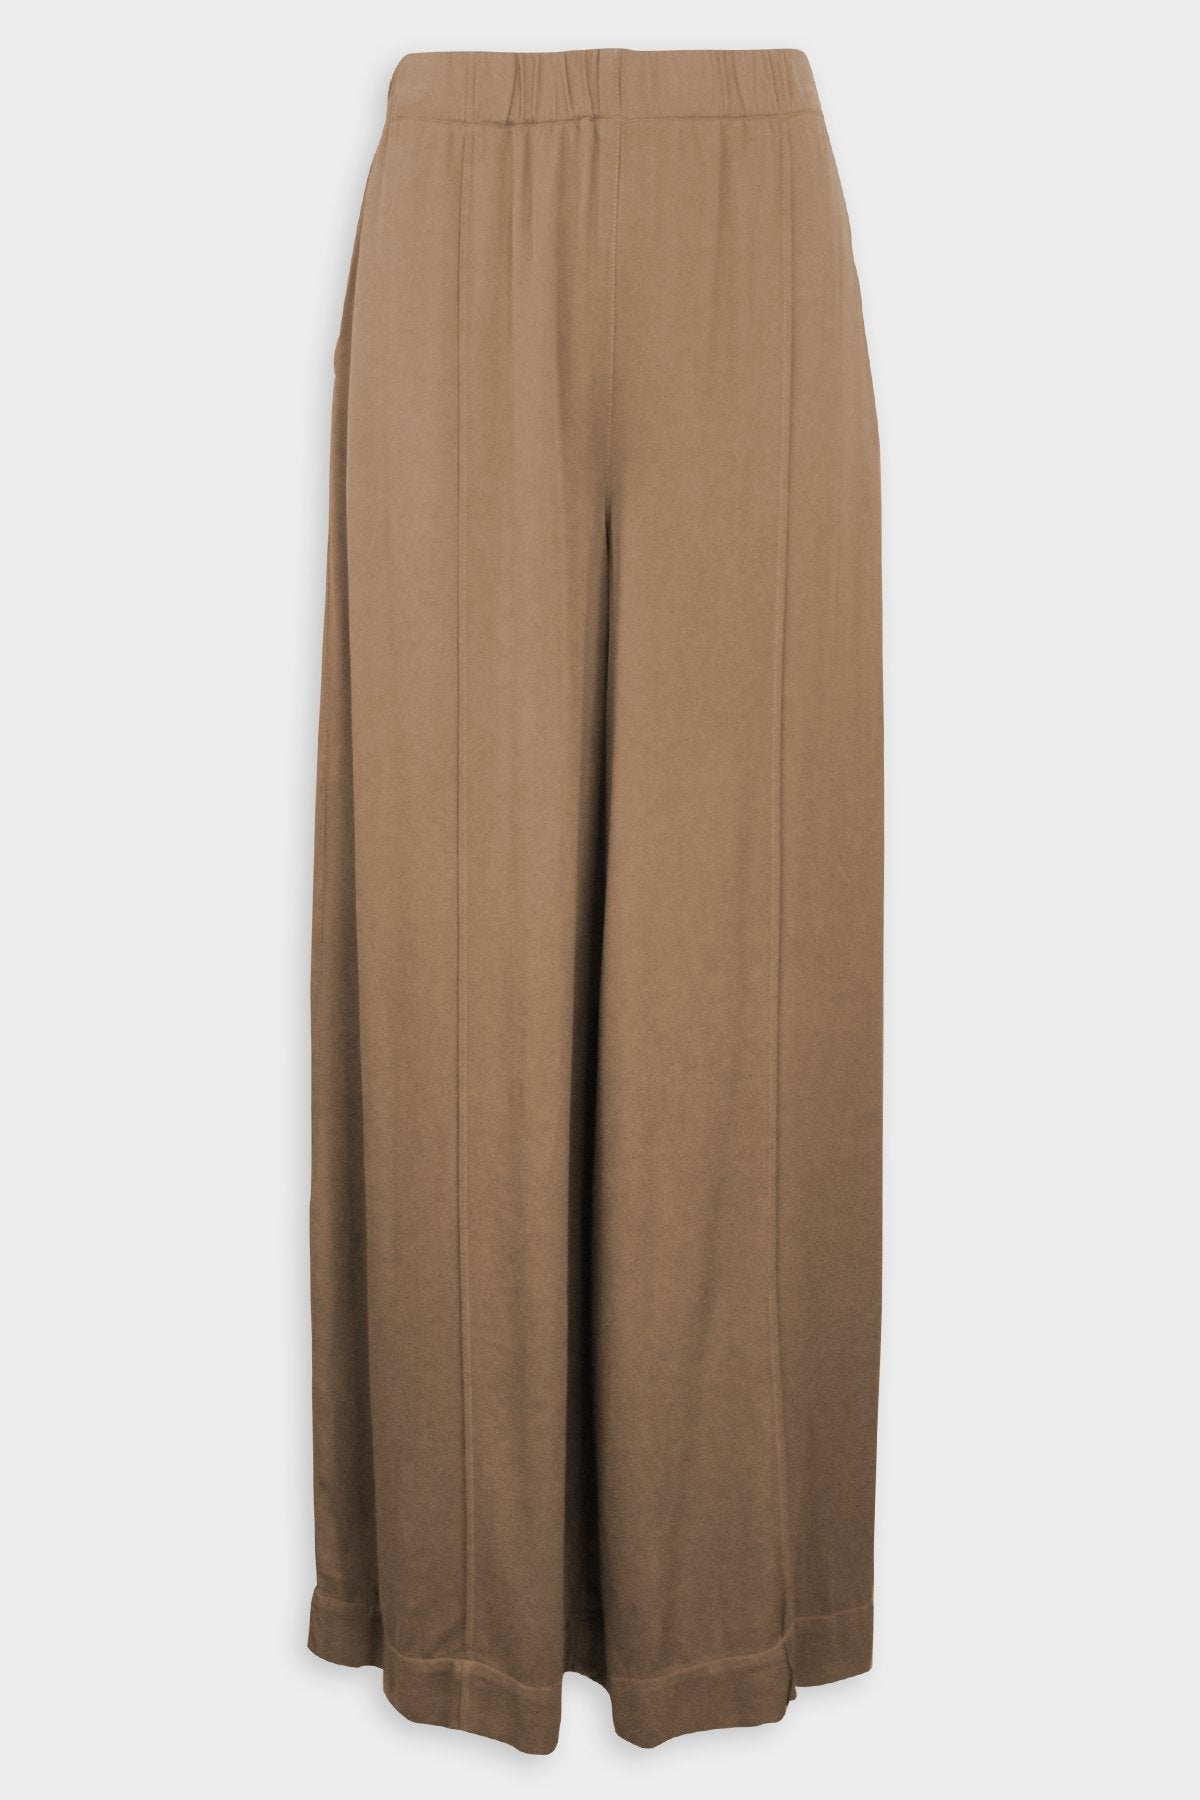 Ready Rave Trouser in Taupe - shop-olivia.com